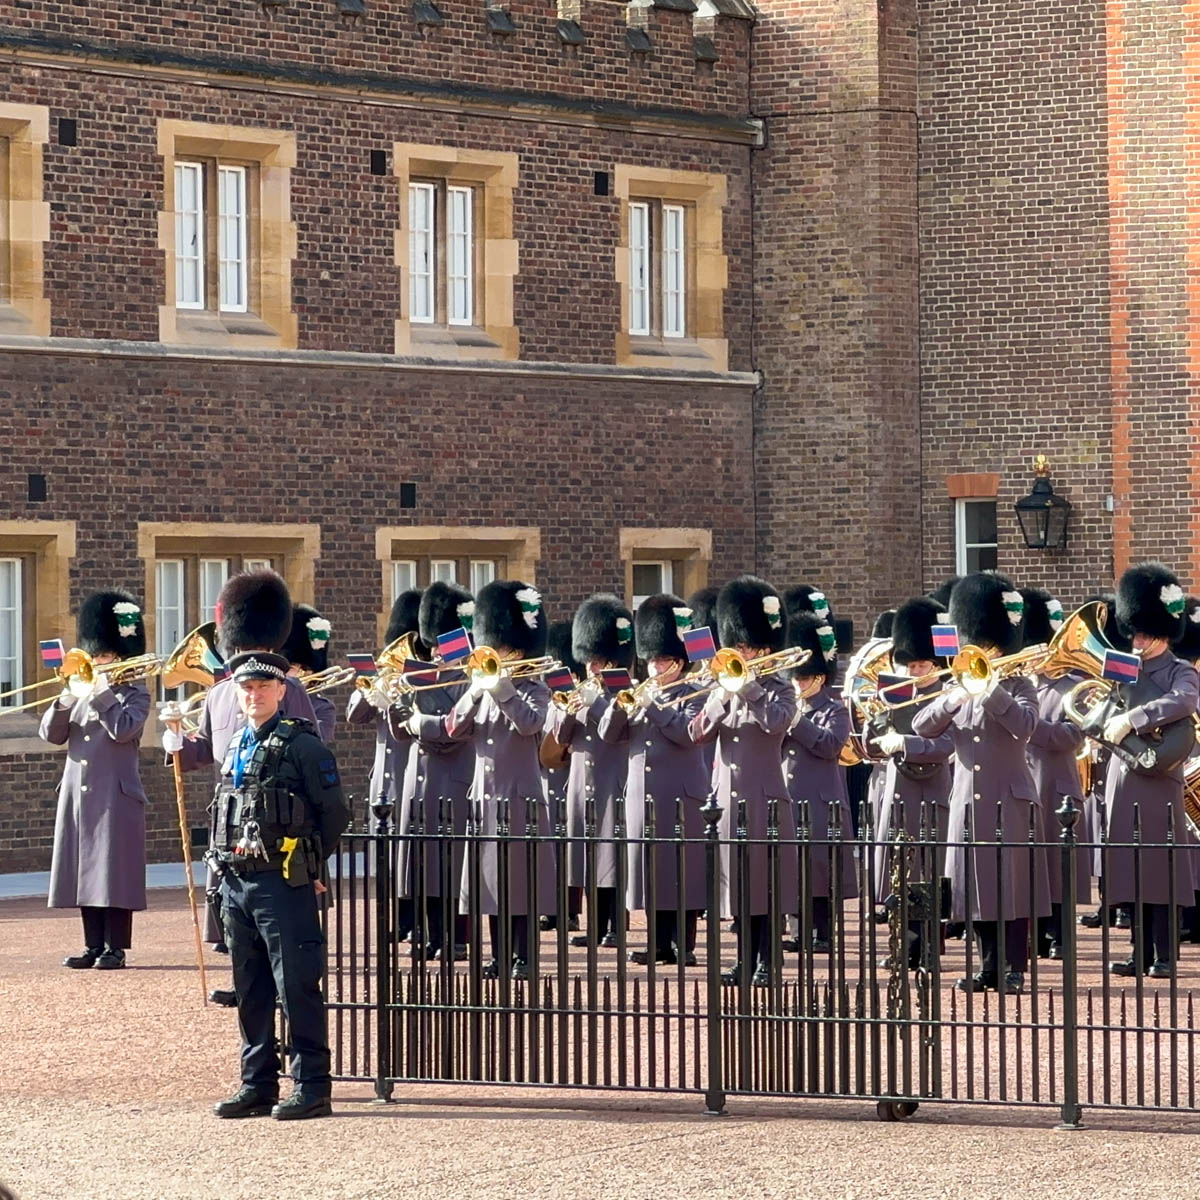 The royal guard band playing outside of St. James Palace